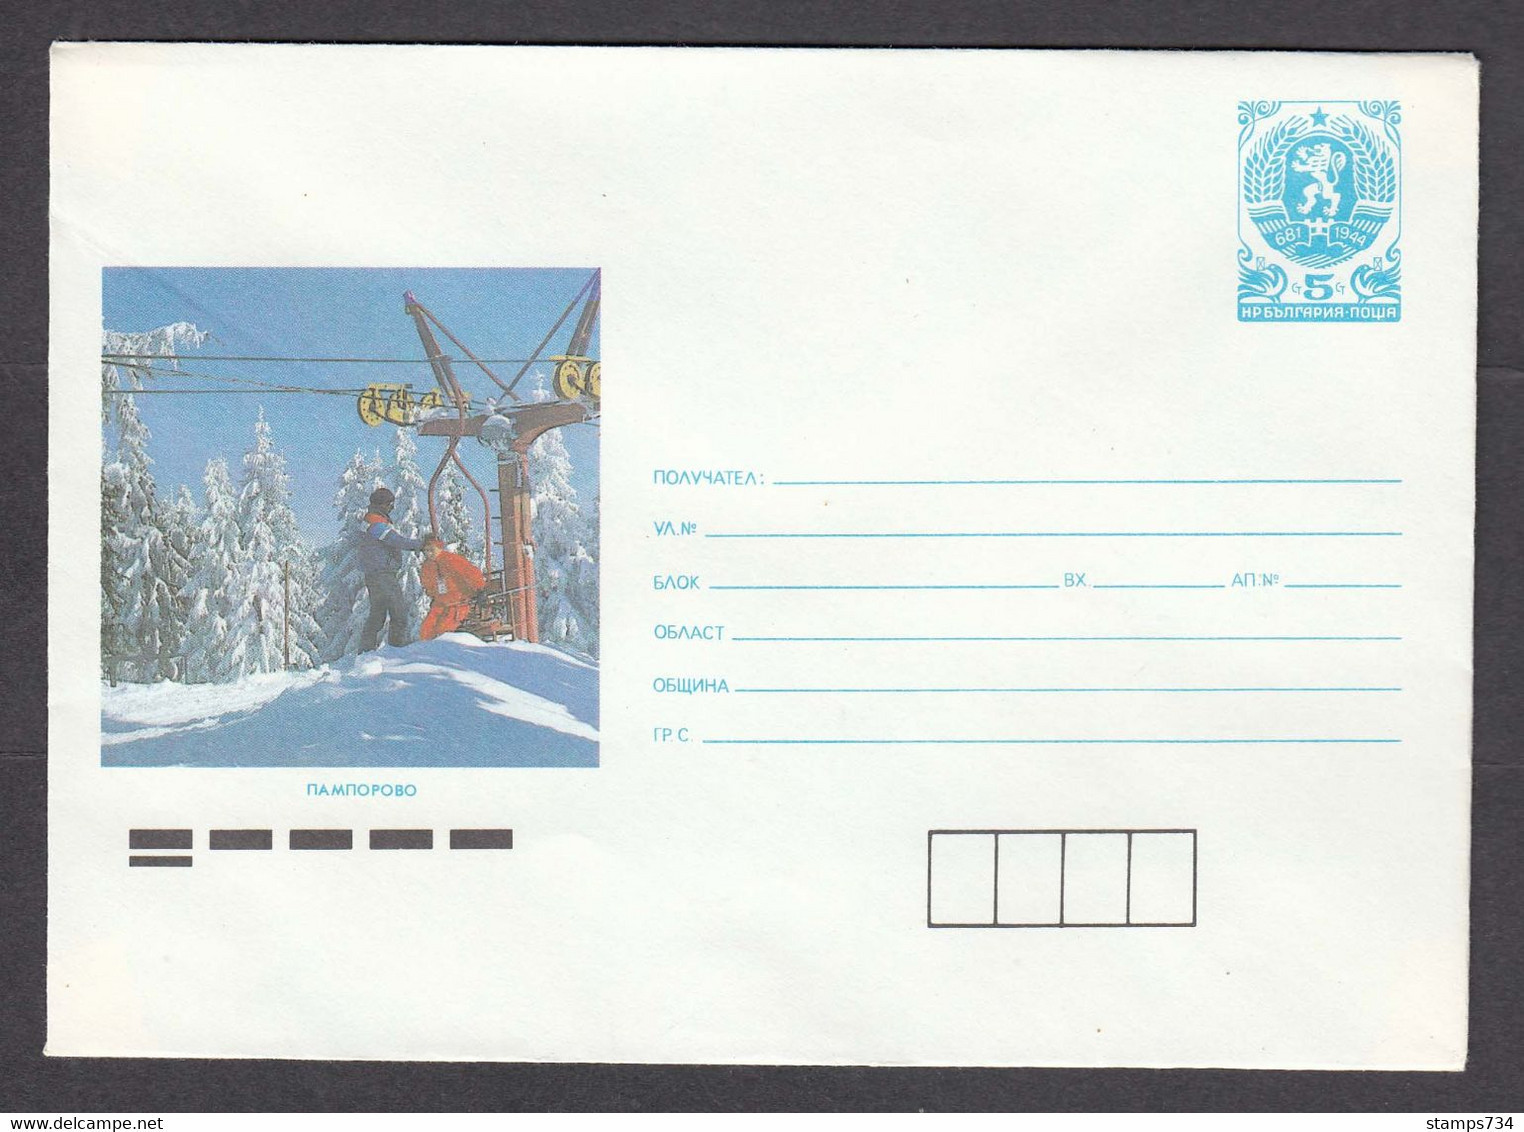 PS 984/1990 - Mint, Pamporovo, Elevator, Post. Stationery - Bulgaria - Covers